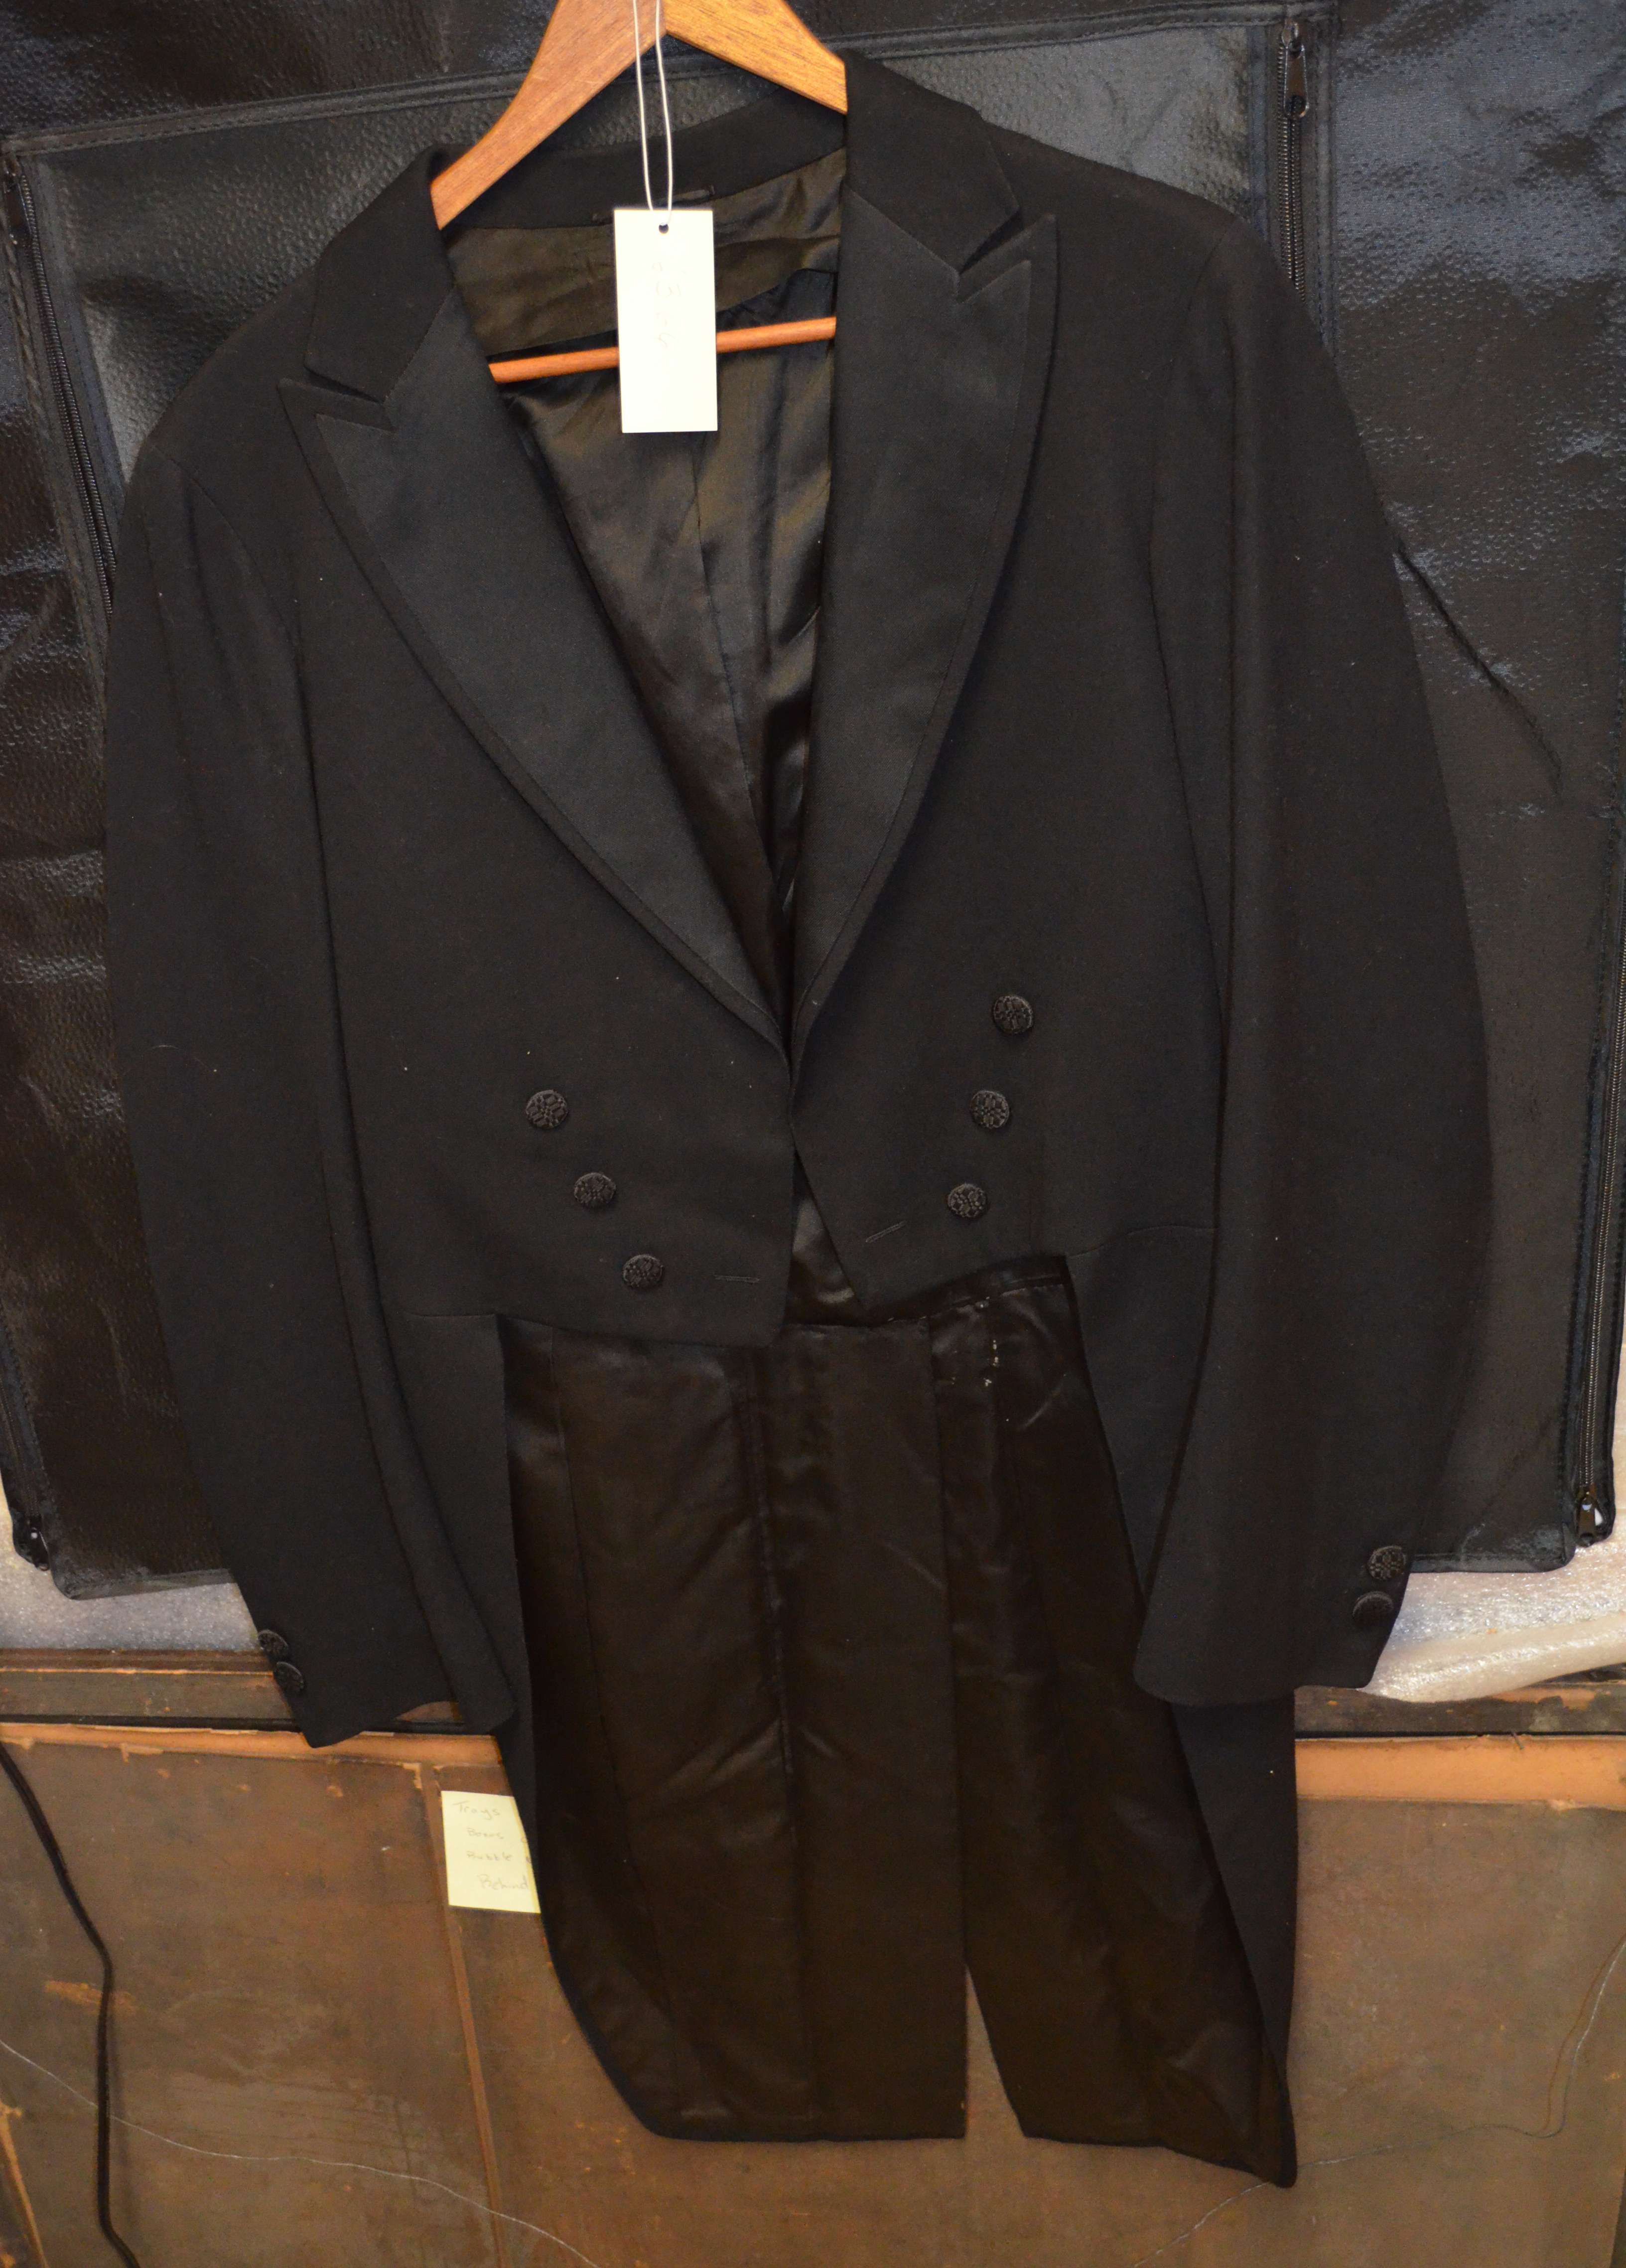 colour%20photo%20showing%20a%20tailcoat%20jacket